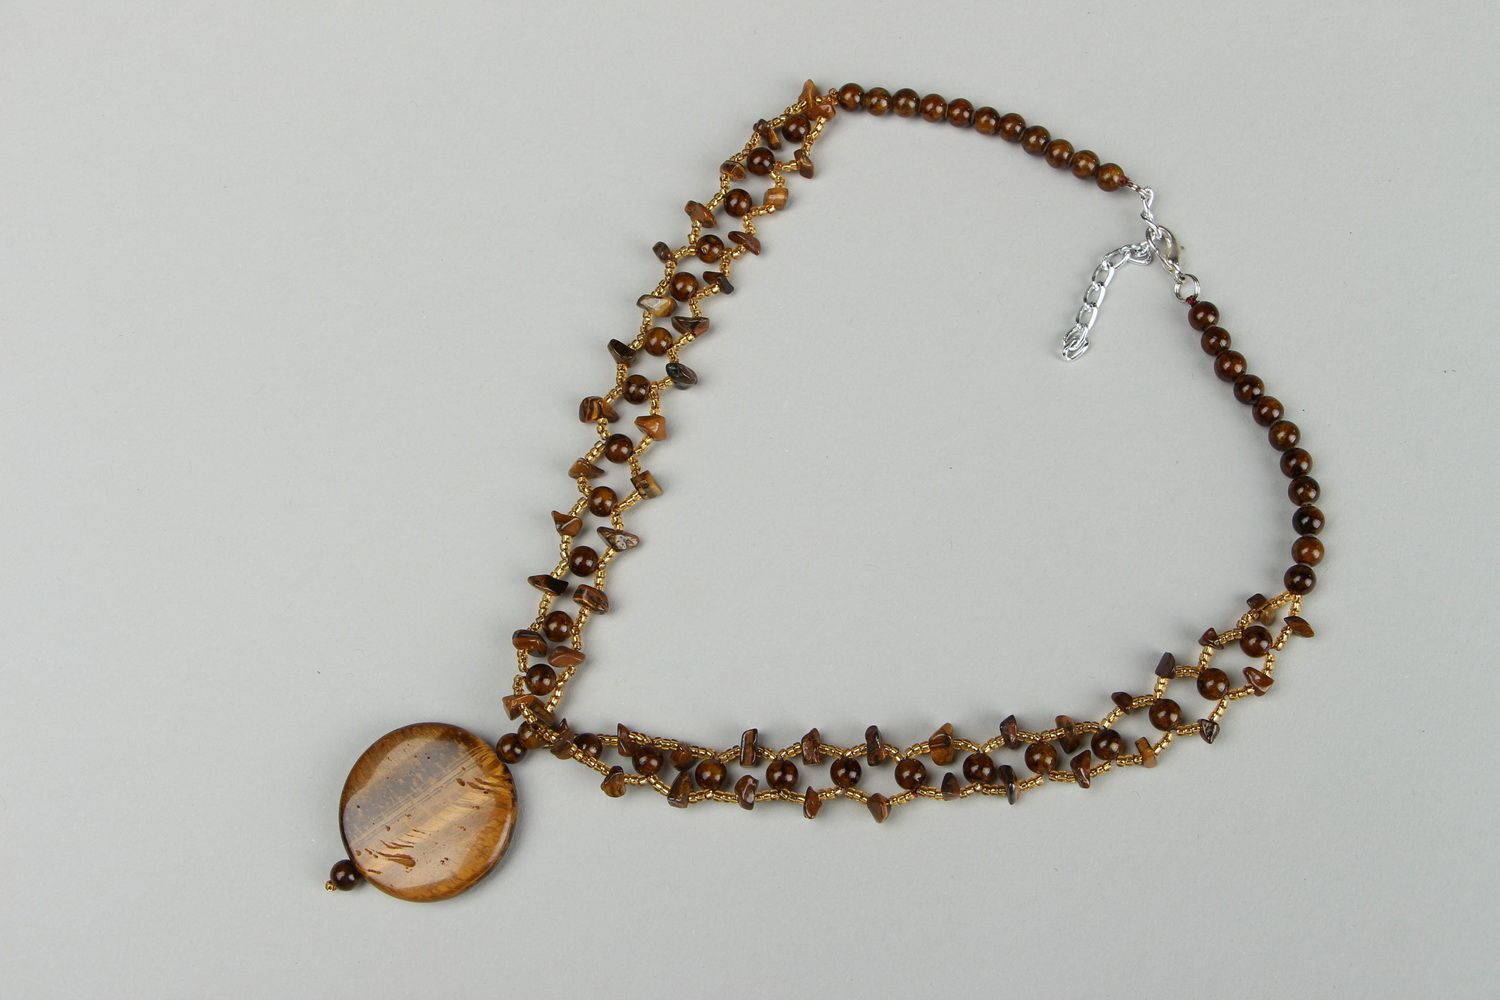 Necklace made of beads and tiger's eye stone photo 2